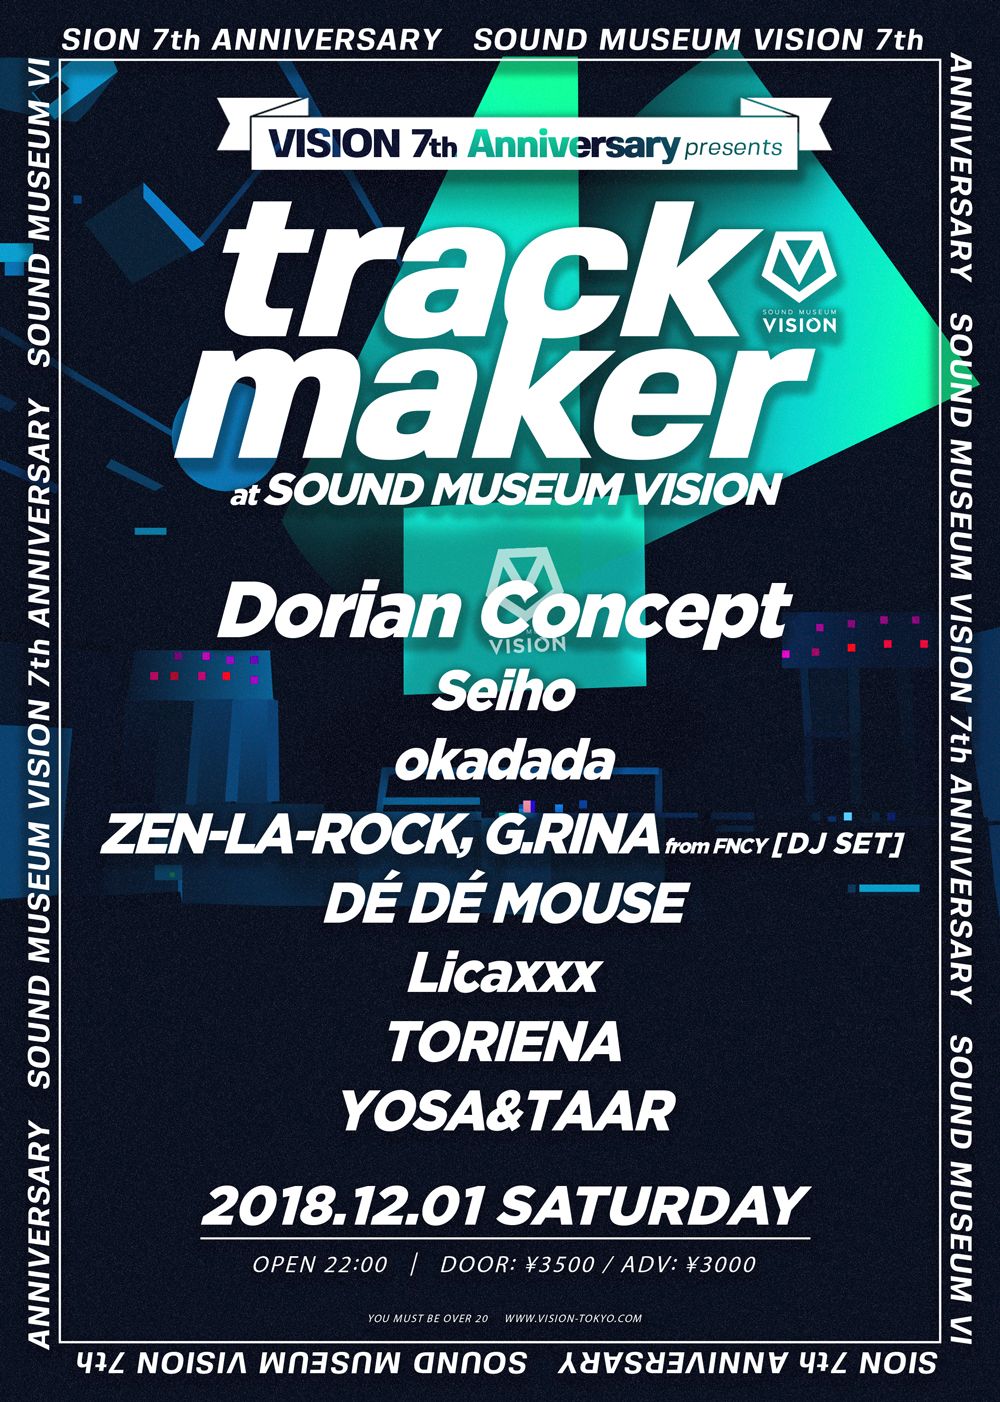 VISION 7th Anniversary 'trackmaker'